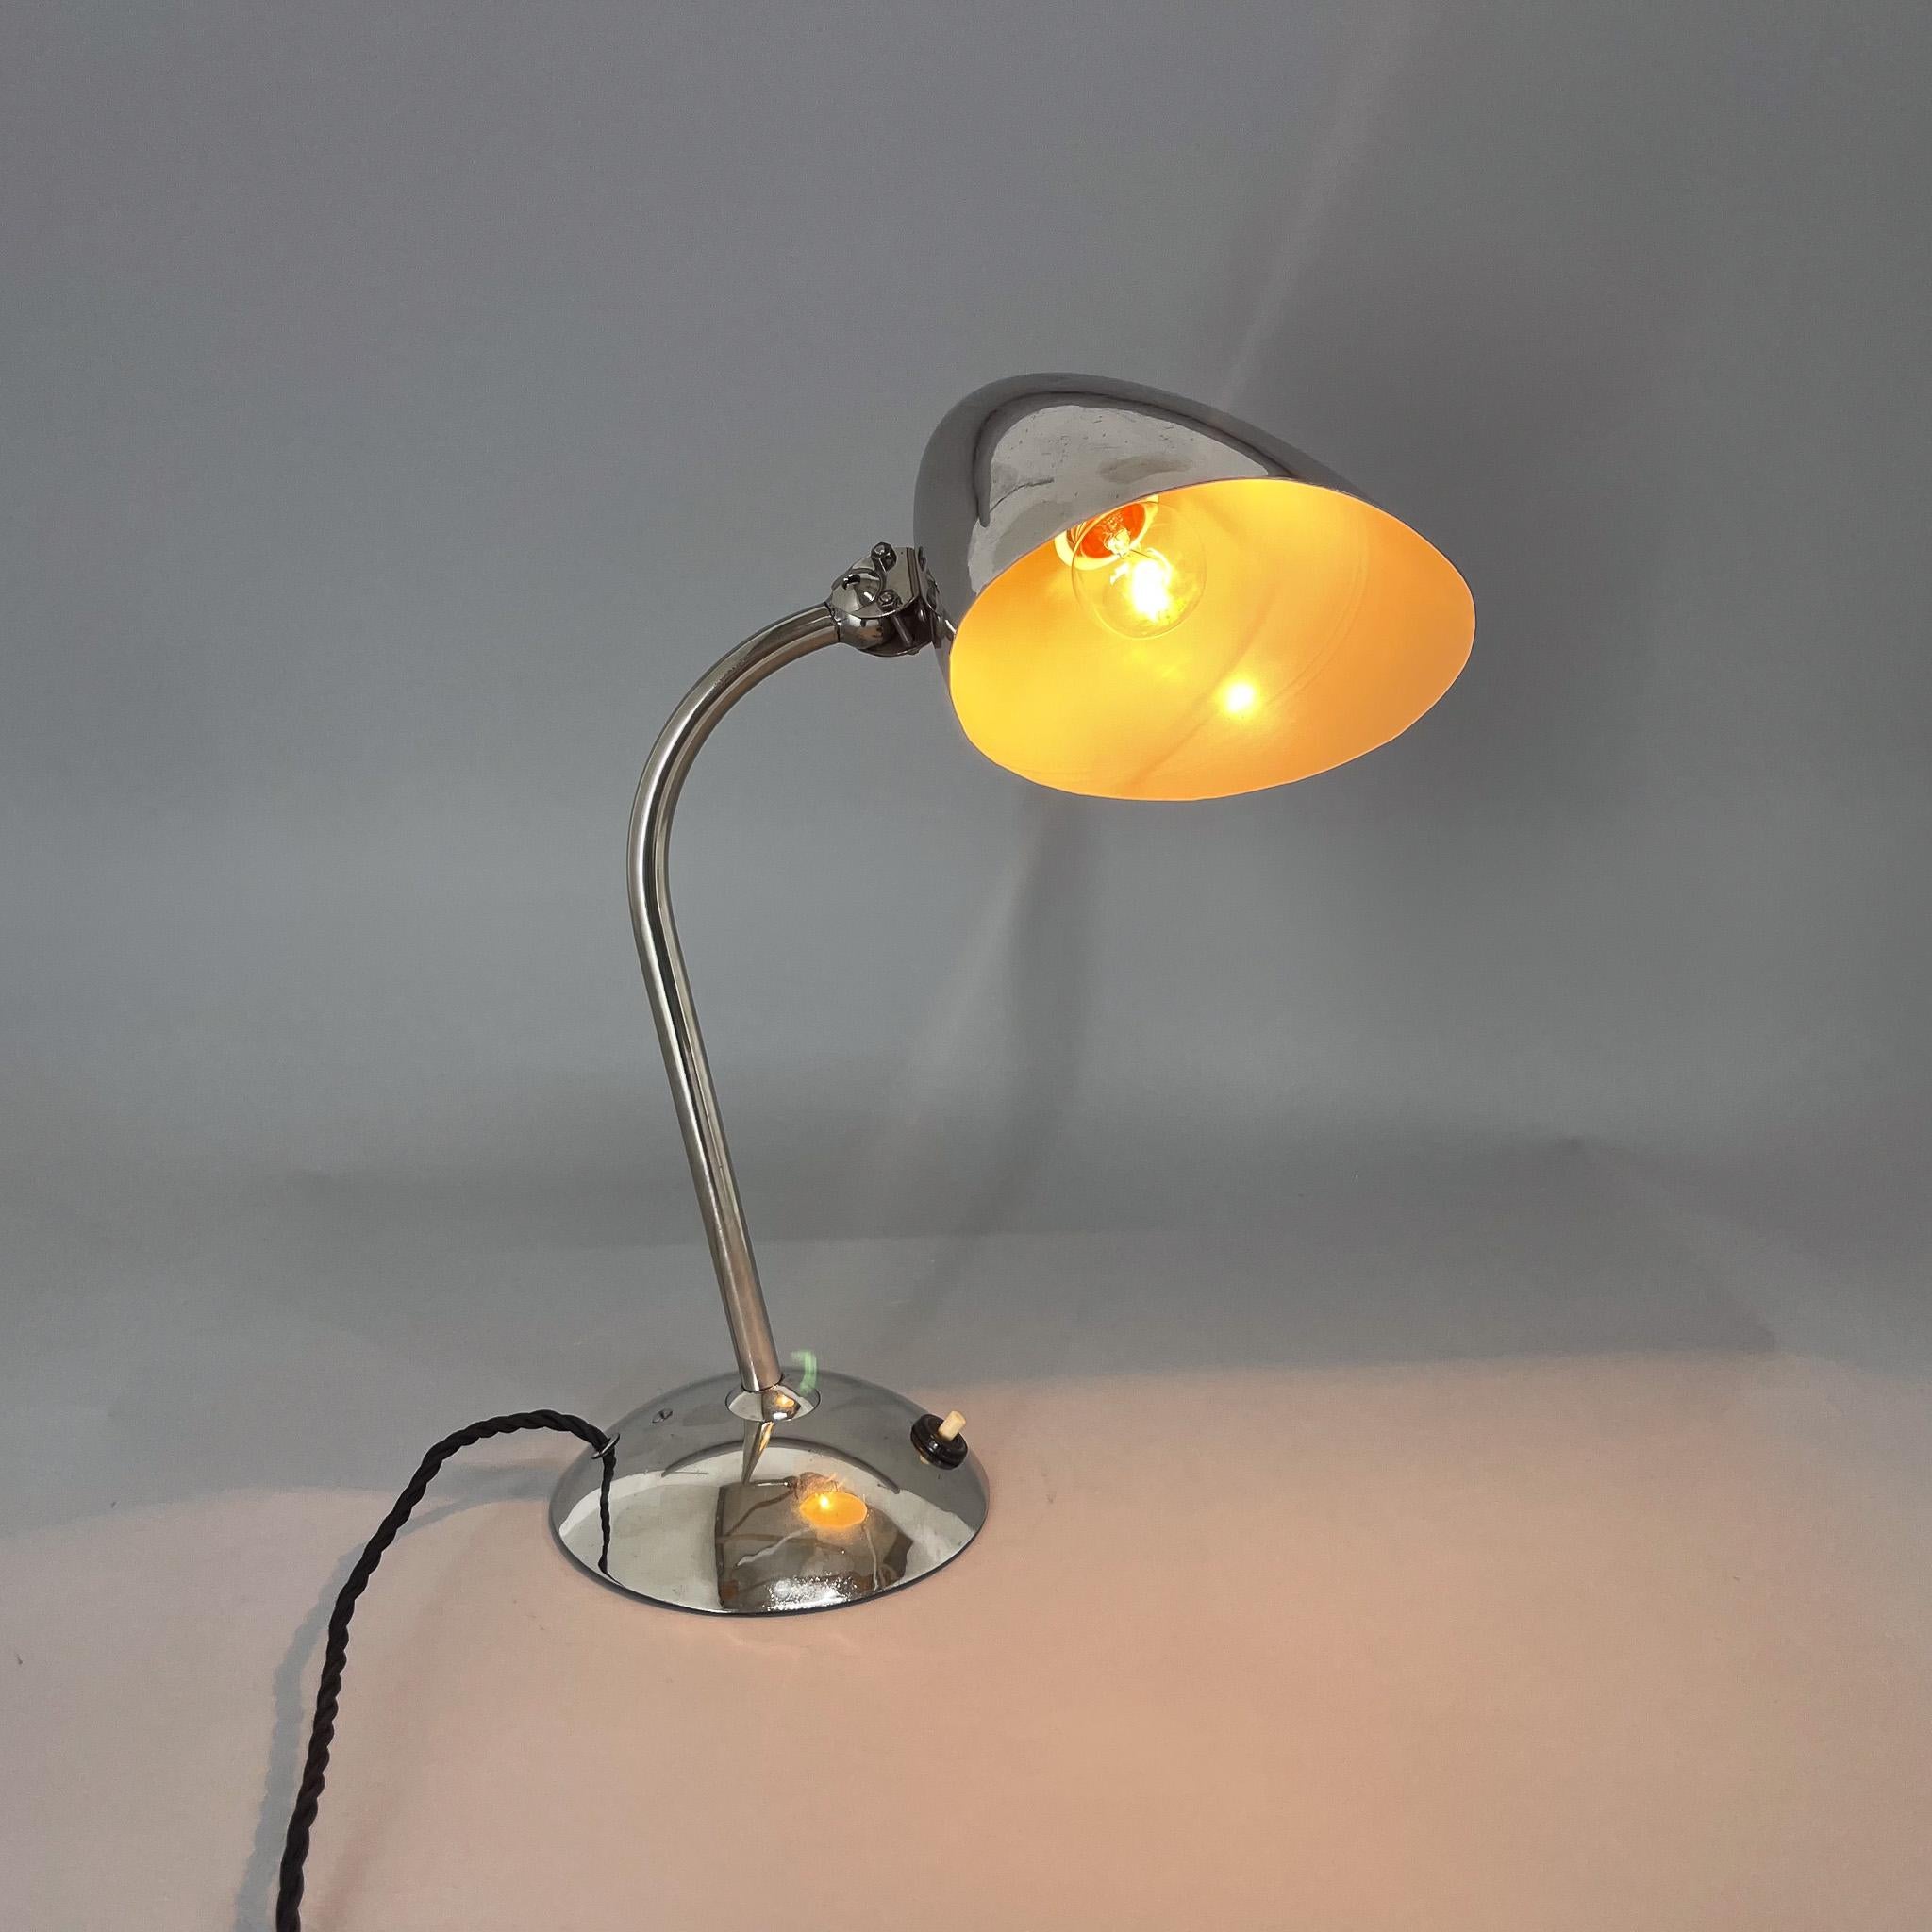 Functionalist / Bauhaus Flexible Table Lamp by Franta Anyz, 1930s For Sale 6